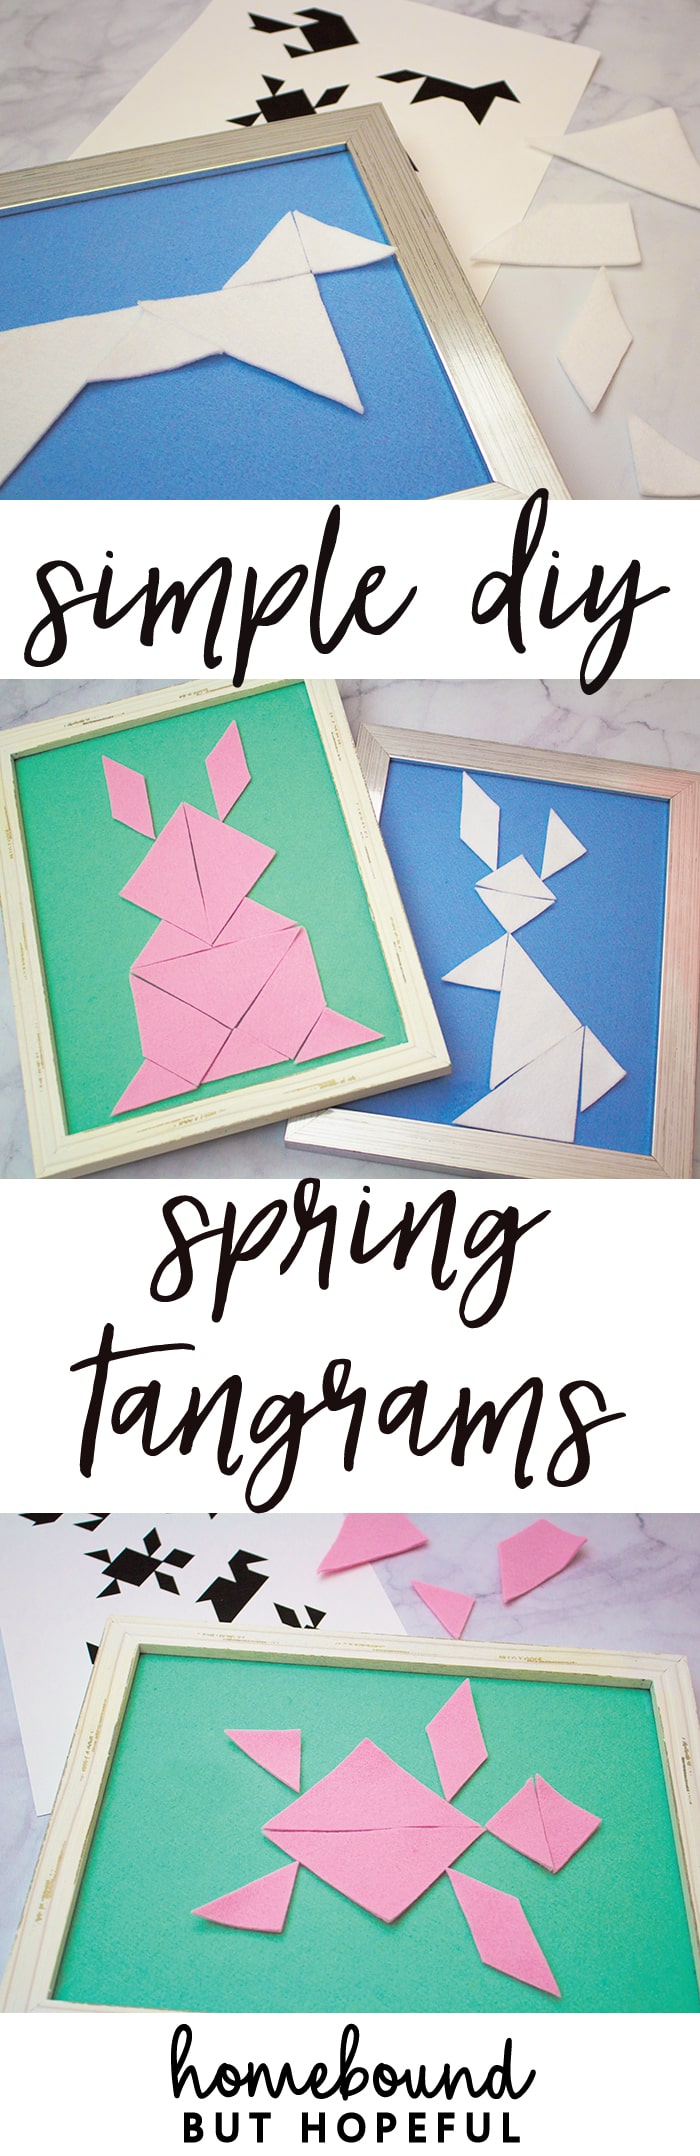 These easy spring tangram puzzles are a quick and simple DIY project that will keep kids thinking! They're perfect to pop into an Easter basket to keep your kiddos busy without resorting to screen time. I've included free printables to get your project started.